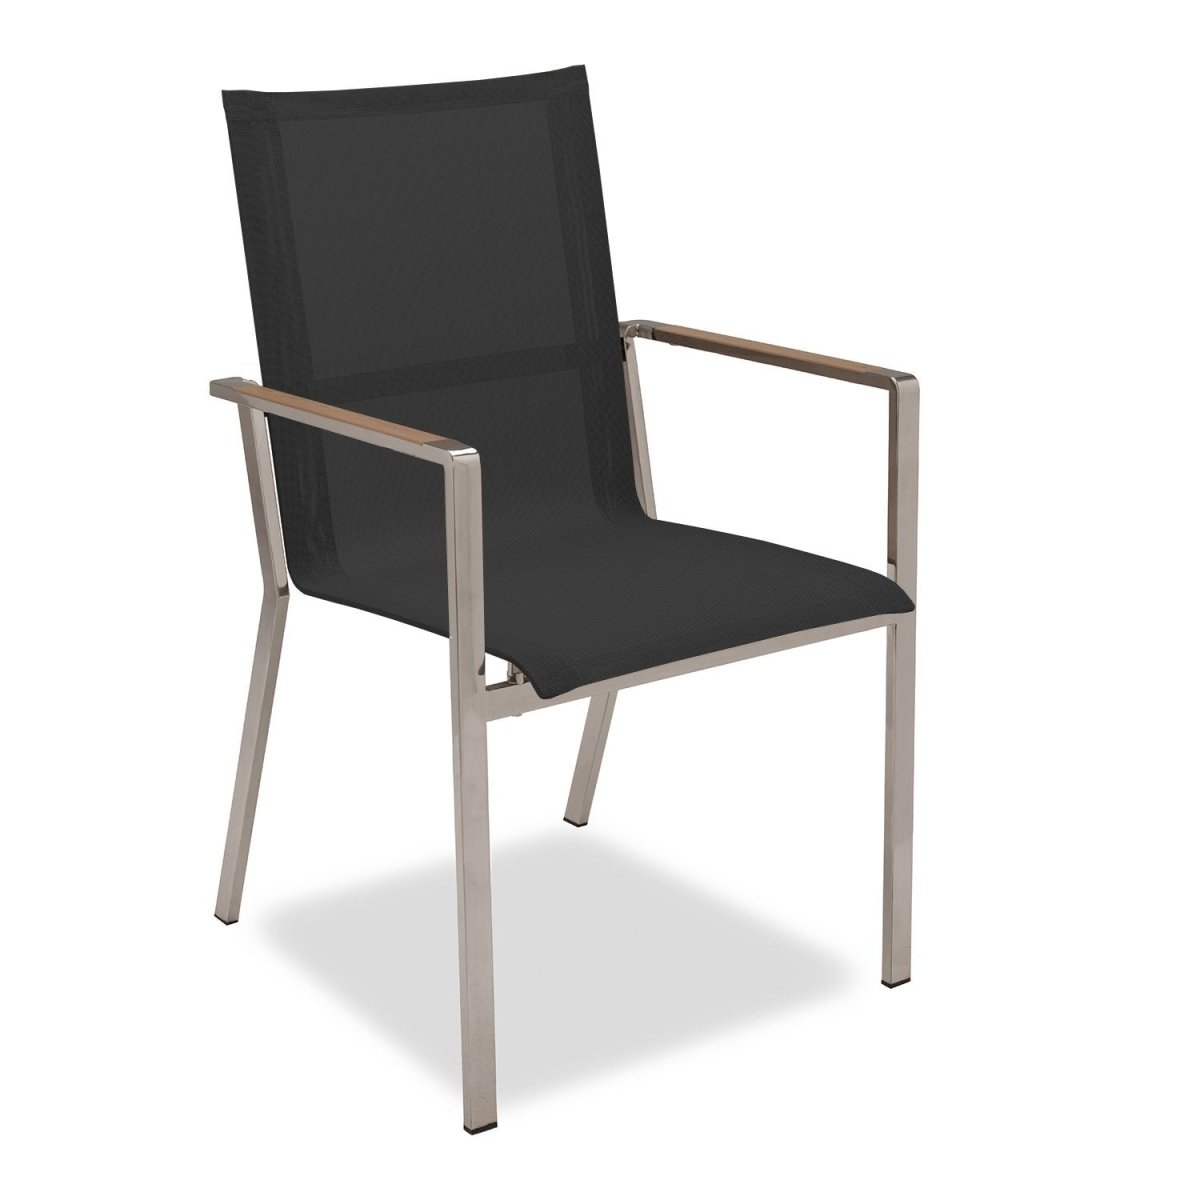 Lucerne Carver Chair in black with Teak inlays